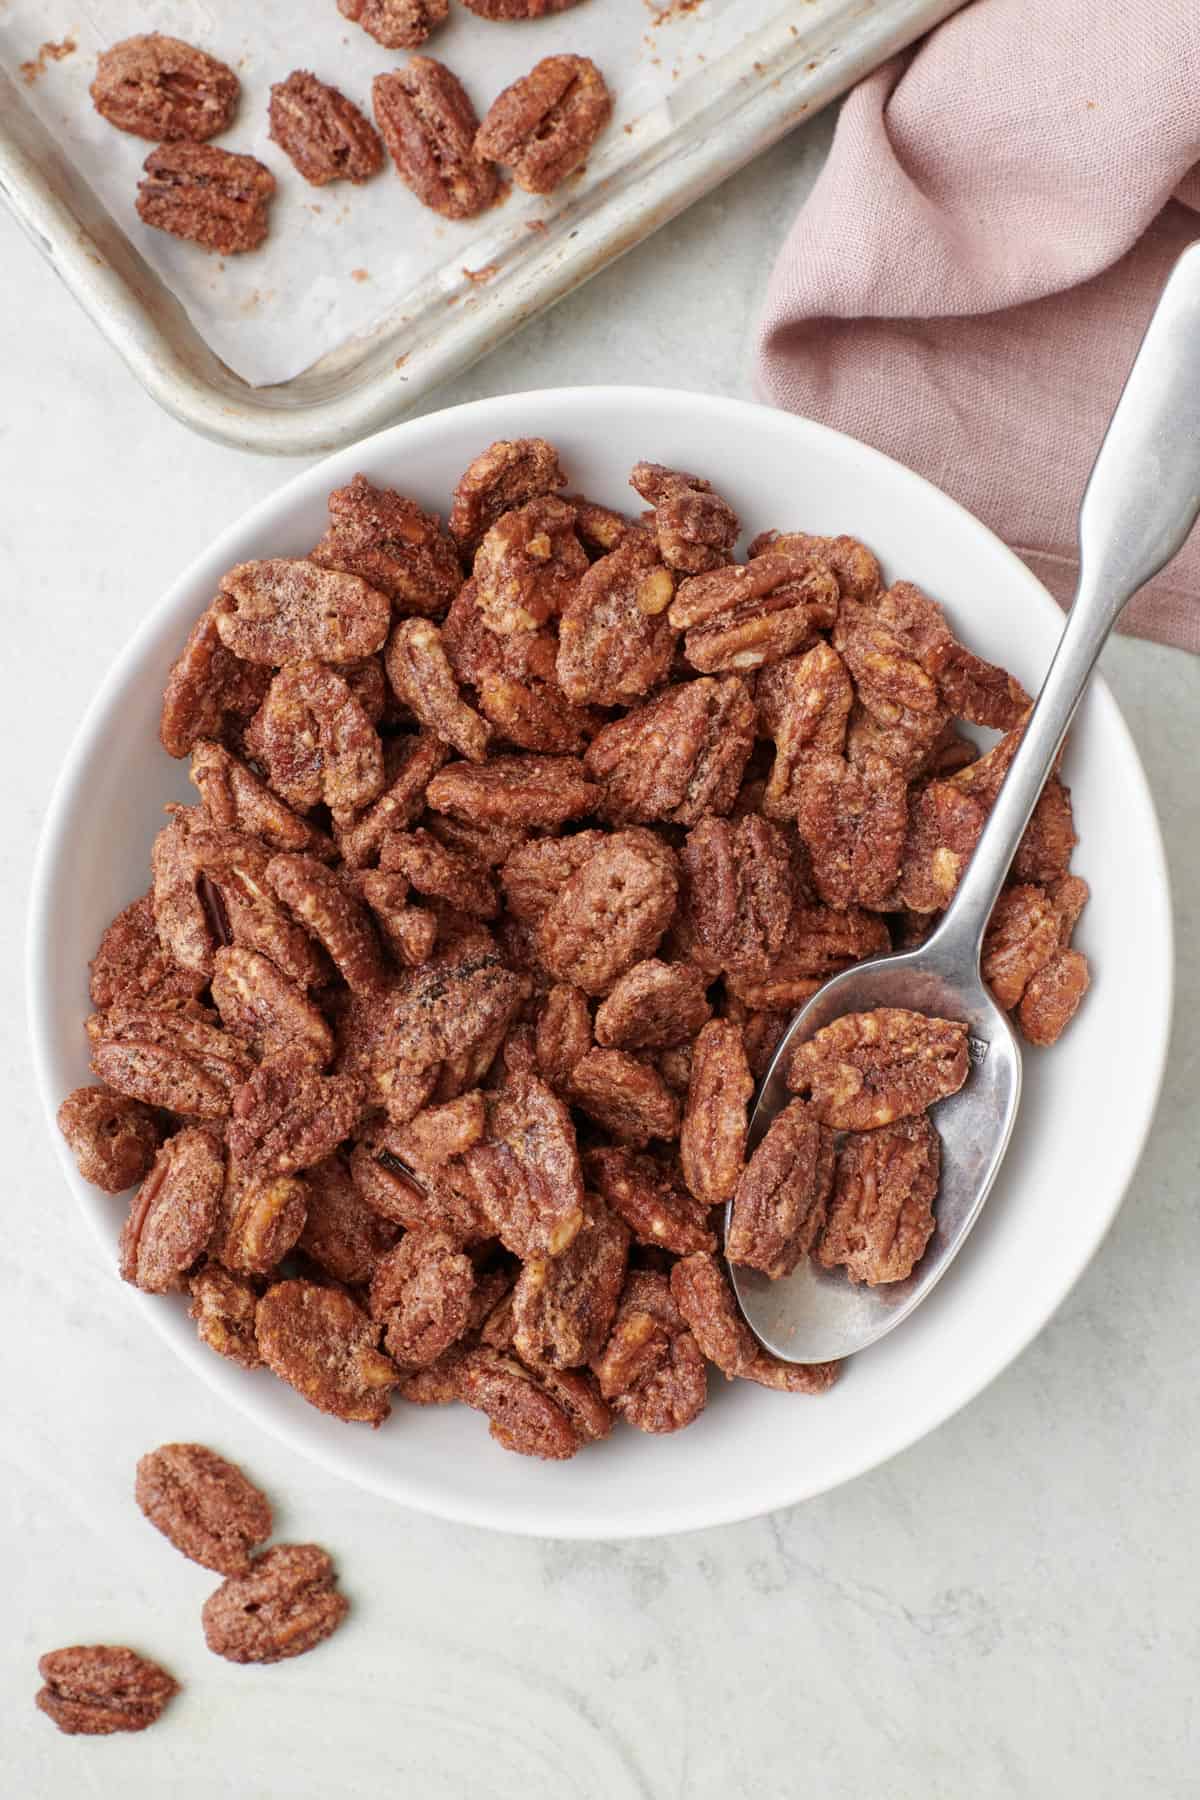 Candied pecans in a bowl with a spoon dipped in for serving.